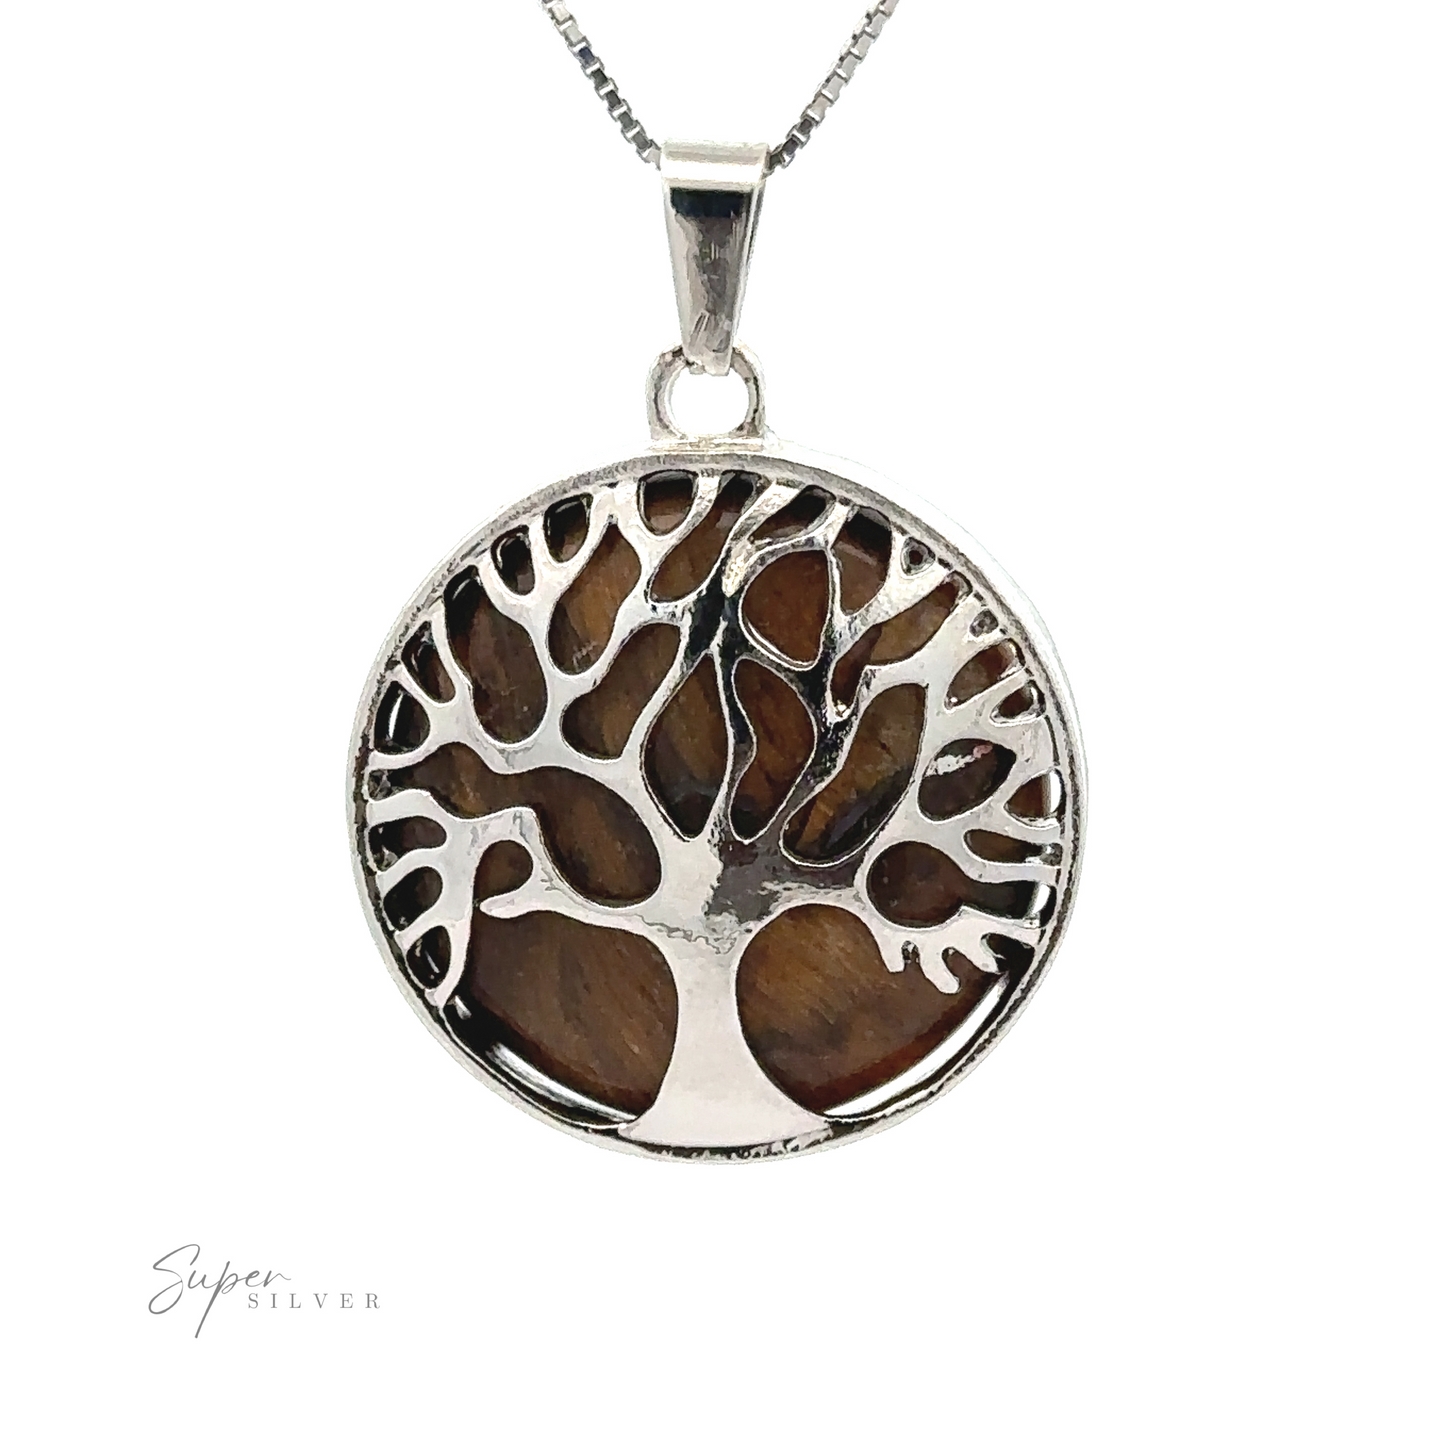 
                  
                    A silver Tree of Life Pendant with intricate branches, set against a dark circular background, hangs from a silver-plated chain. The logo "Super Silver" is visible in the lower left corner.
                  
                